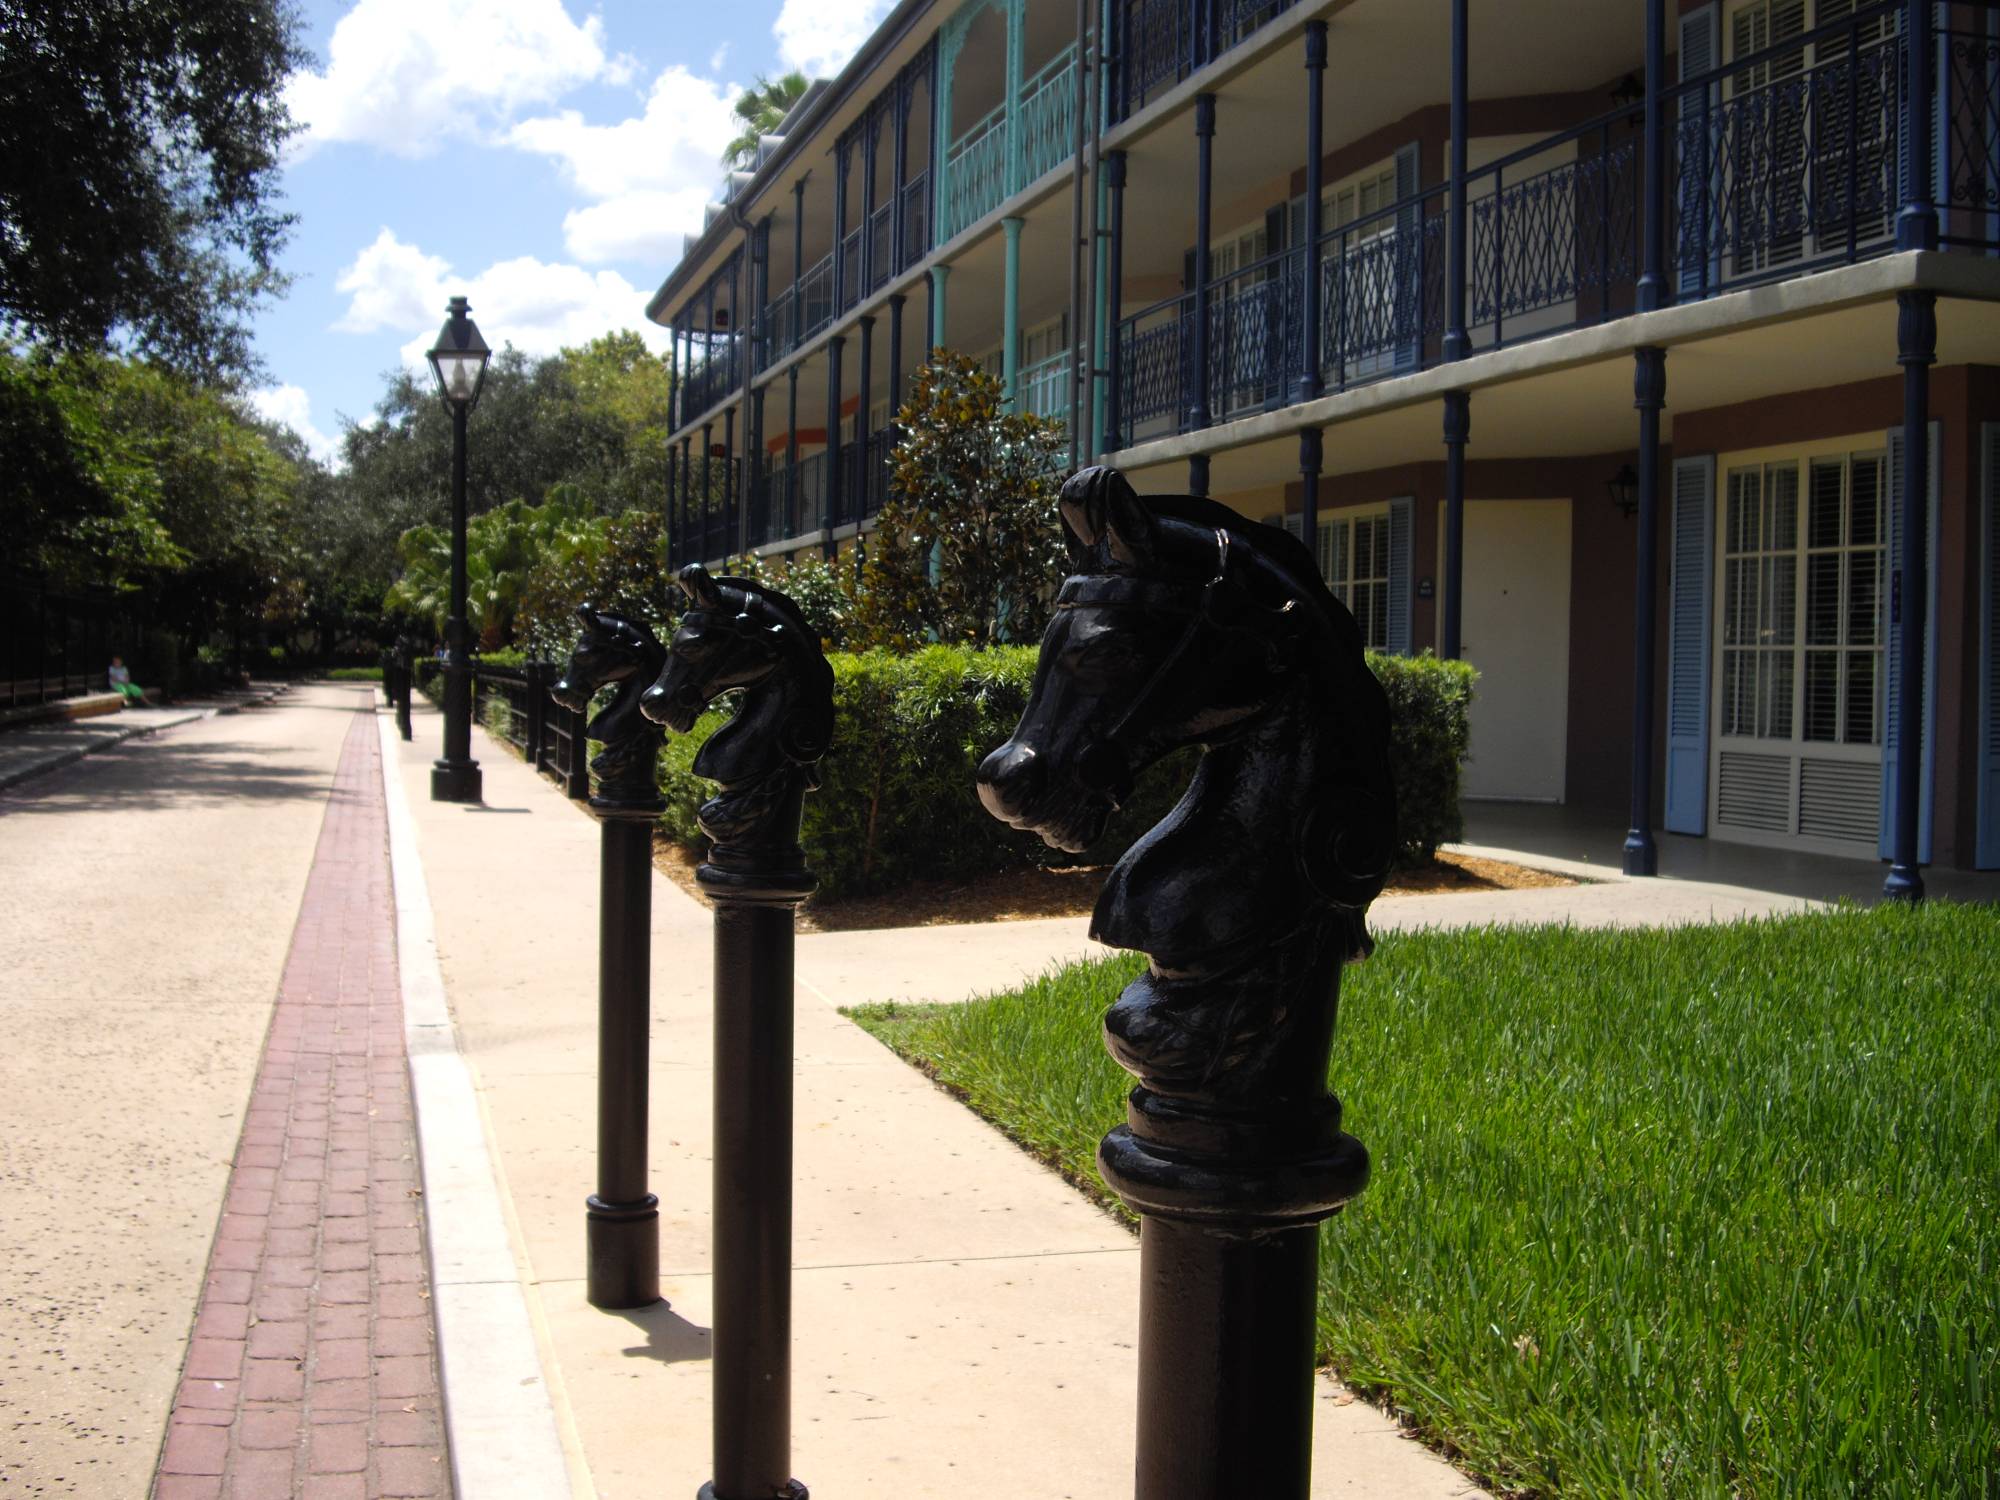 Port Orleans French Quarter walkway